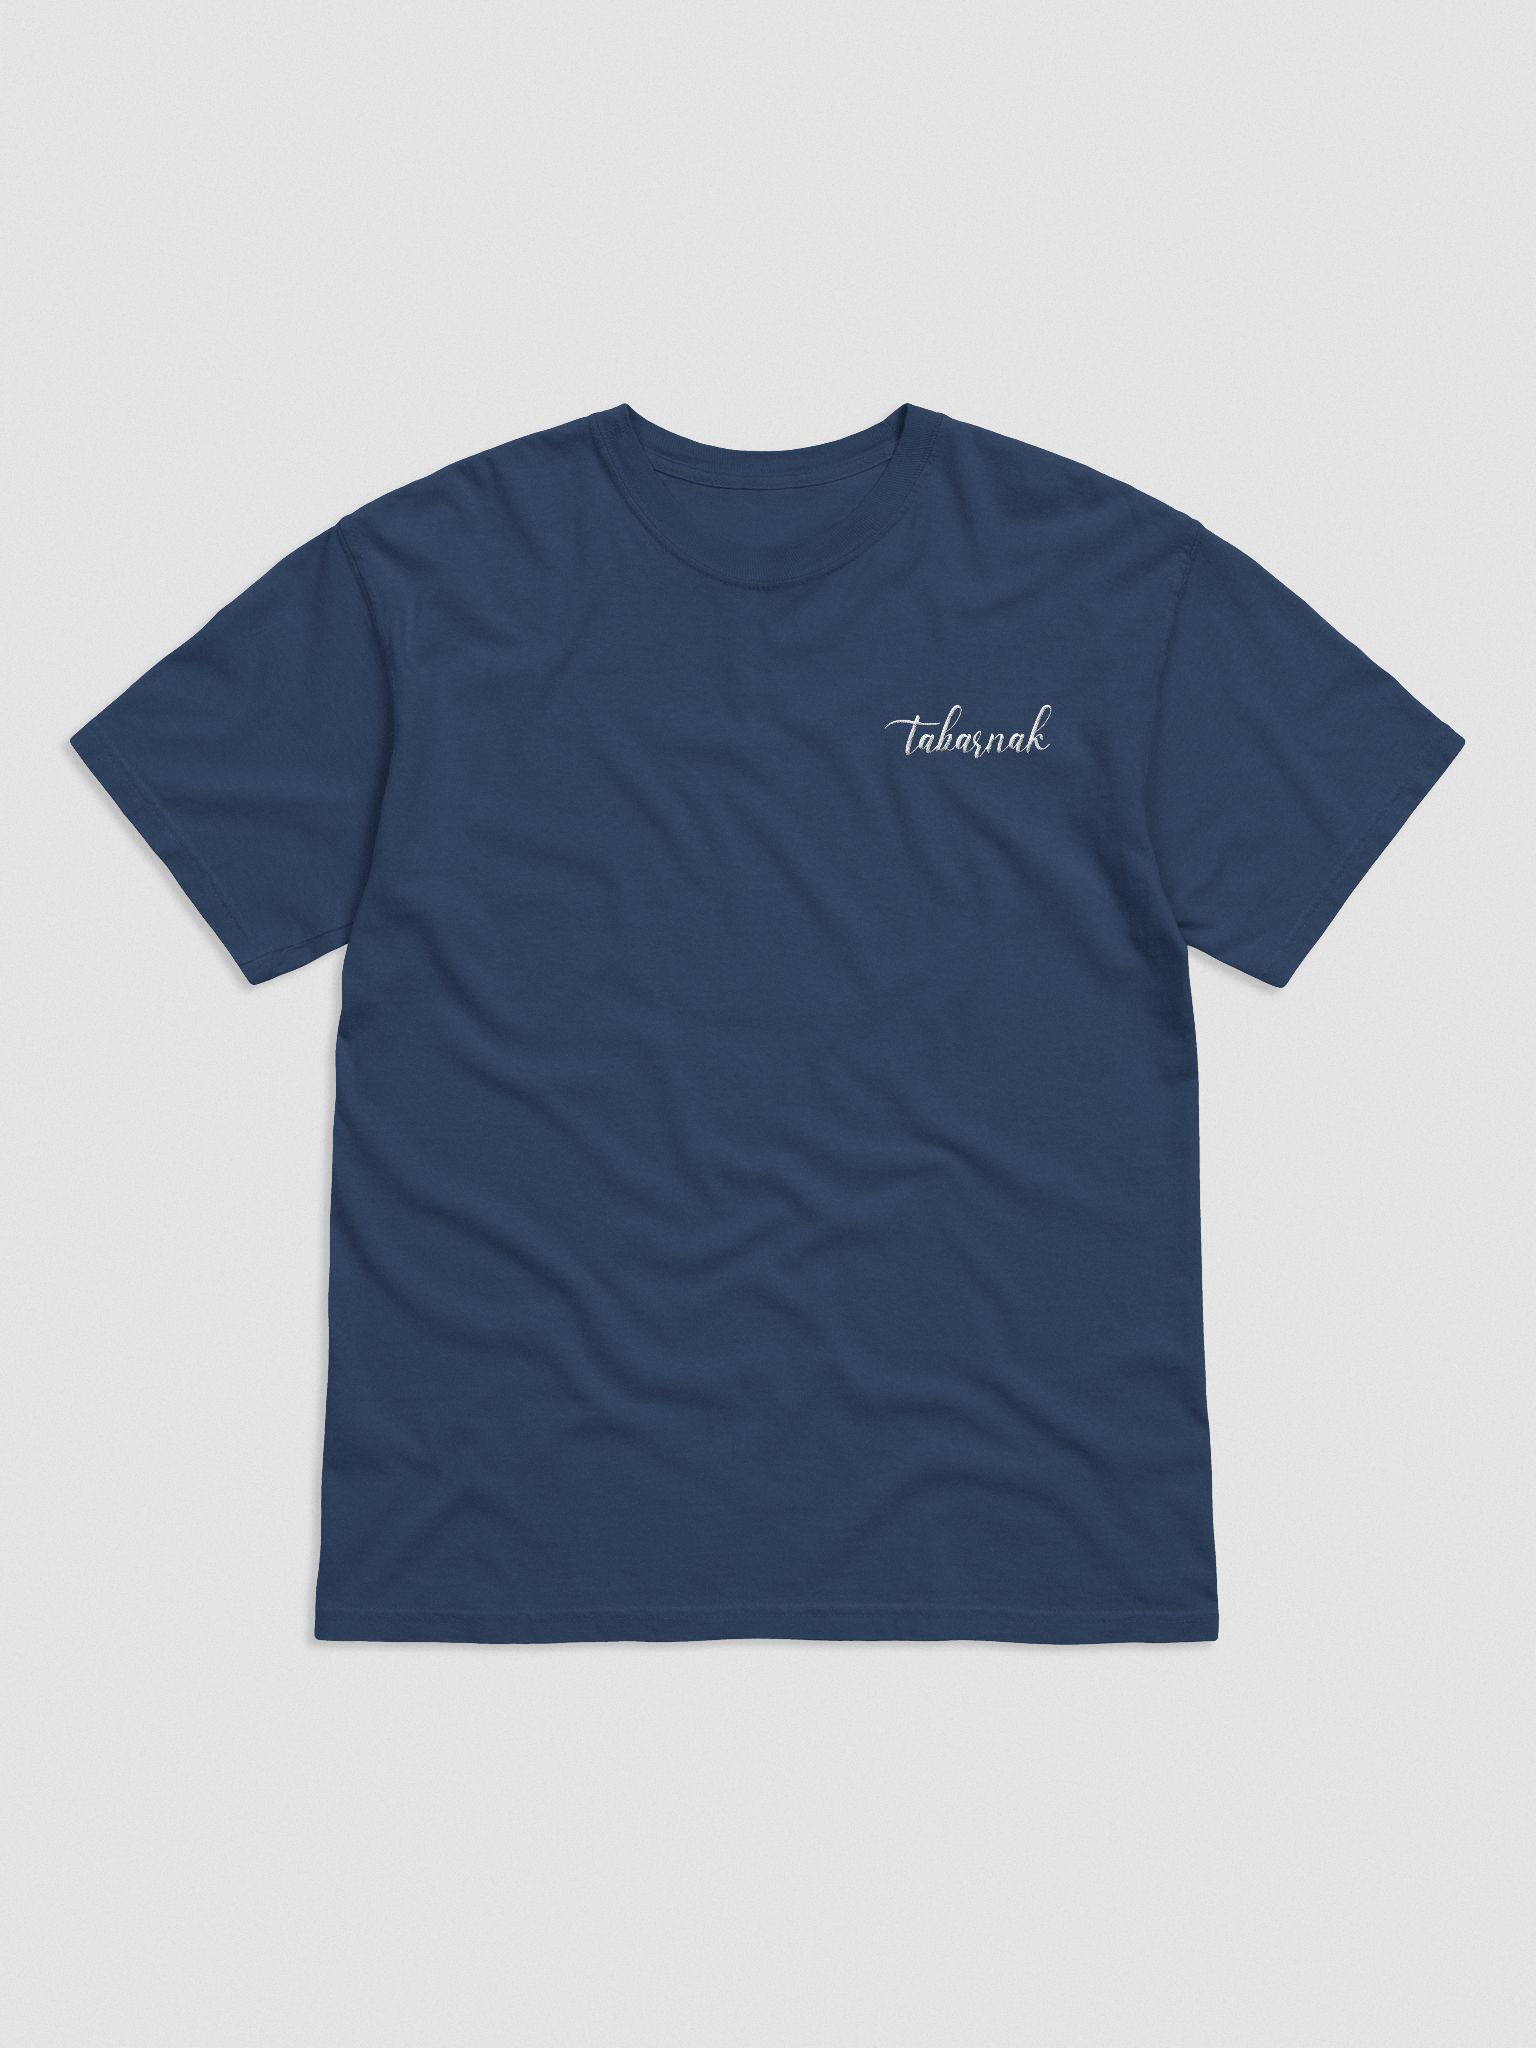 Shark of Messina - Rouleur embroidered t-shirt